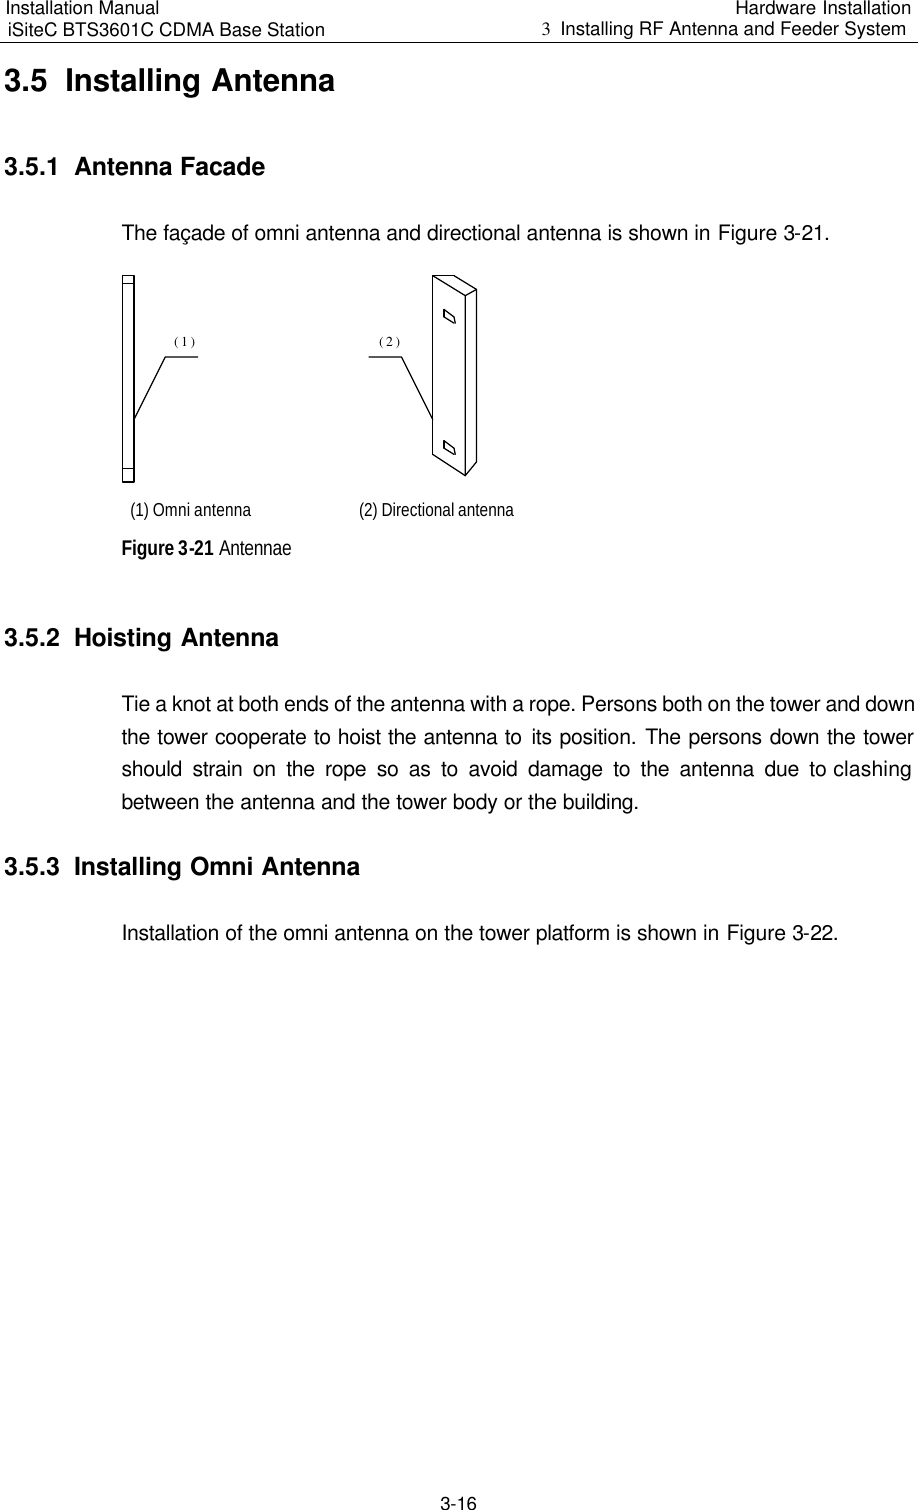 Installation Manual   iSiteC BTS3601C CDMA Base Station Hardware Installation 3  Installing RF Antenna and Feeder System  3-16 3.5  Installing Antenna 3.5.1  Antenna Facade The façade of omni antenna and directional antenna is shown in Figure 3-21. (1)(2) (1) Omni antenna (2) Directional antenna Figure 3-21 Antennae 3.5.2  Hoisting Antenna Tie a knot at both ends of the antenna with a rope. Persons both on the tower and down the tower cooperate to hoist the antenna to its position. The persons down the tower should strain on the rope so as to avoid damage to the antenna due to clashing between the antenna and the tower body or the building. 3.5.3  Installing Omni Antenna Installation of the omni antenna on the tower platform is shown in Figure 3-22. 